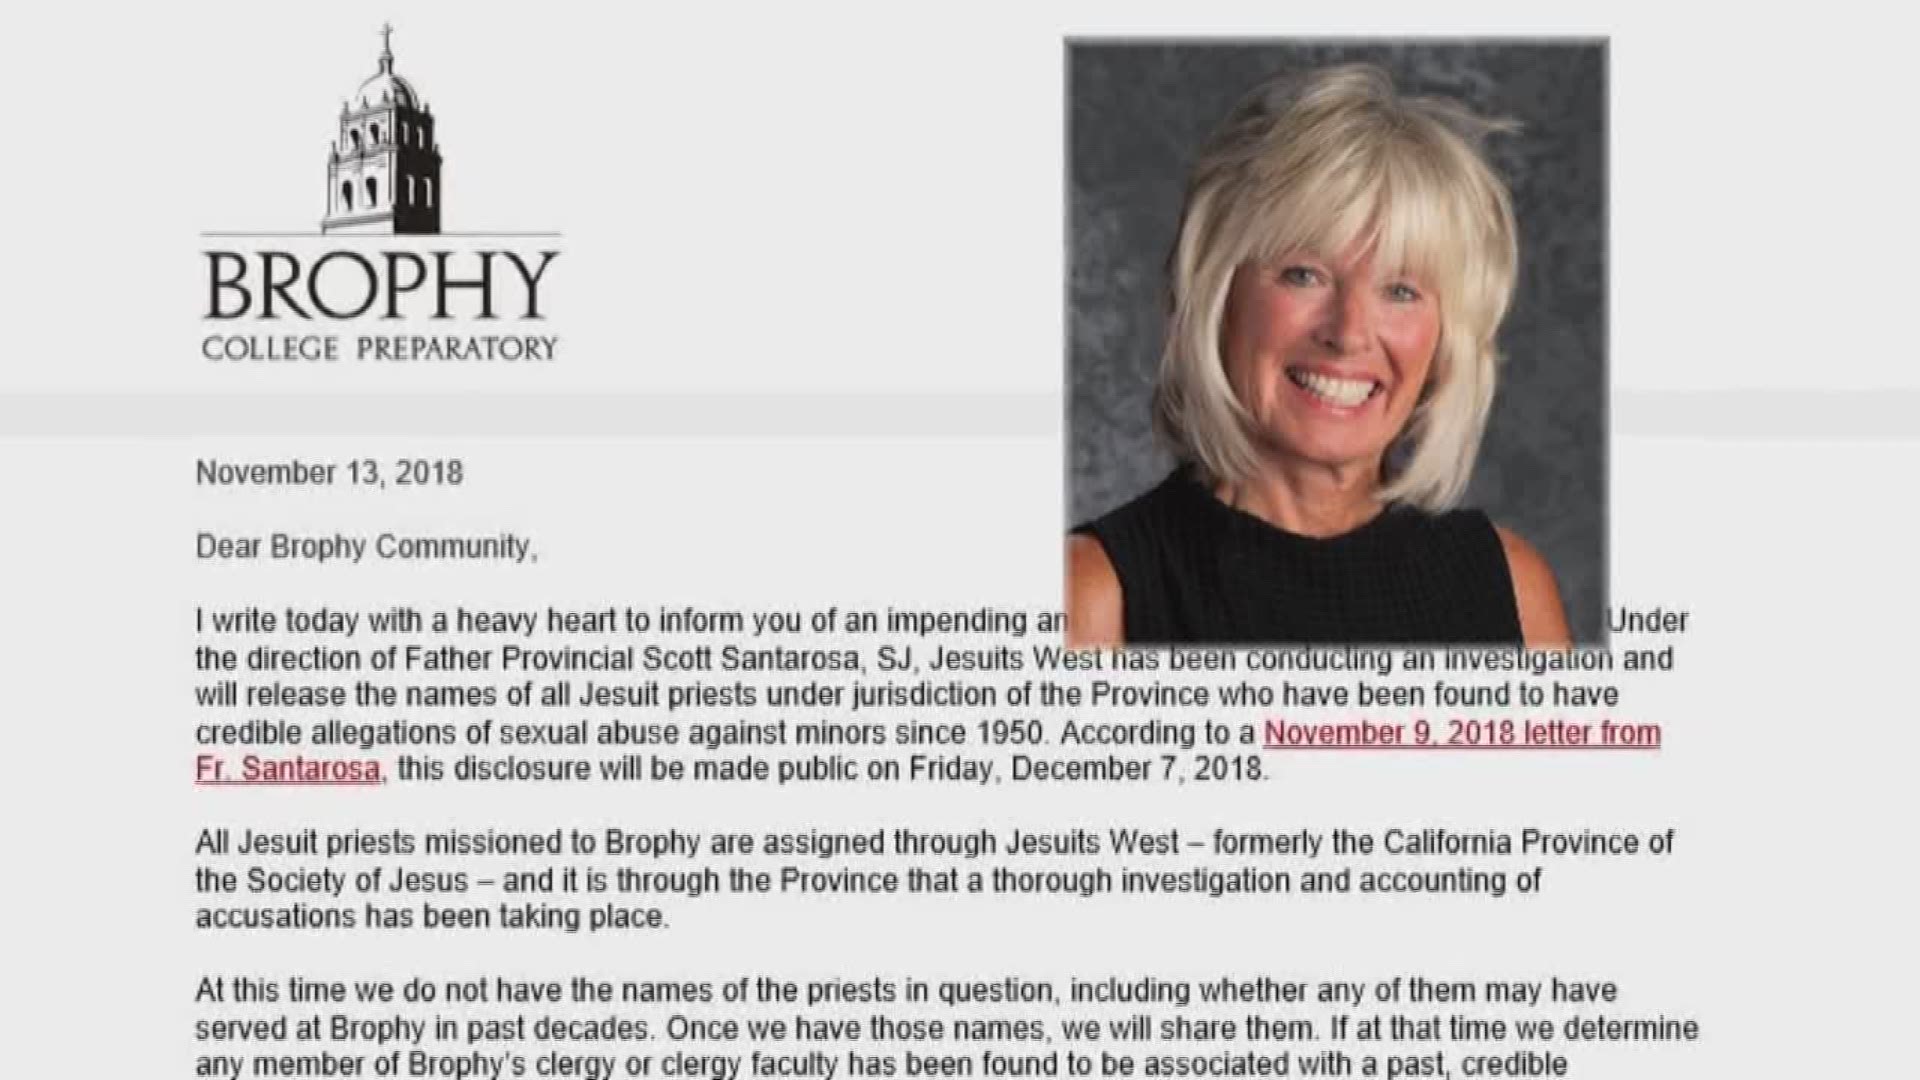 In an open letter written yesterday by Brophy President Adria Renke she states she is writing with "a heavy heart" to inform the community of an impending announcement by a Catholic group of priests who are investigating allegations of abuse. She does not say if a Brophy priest will be accused.